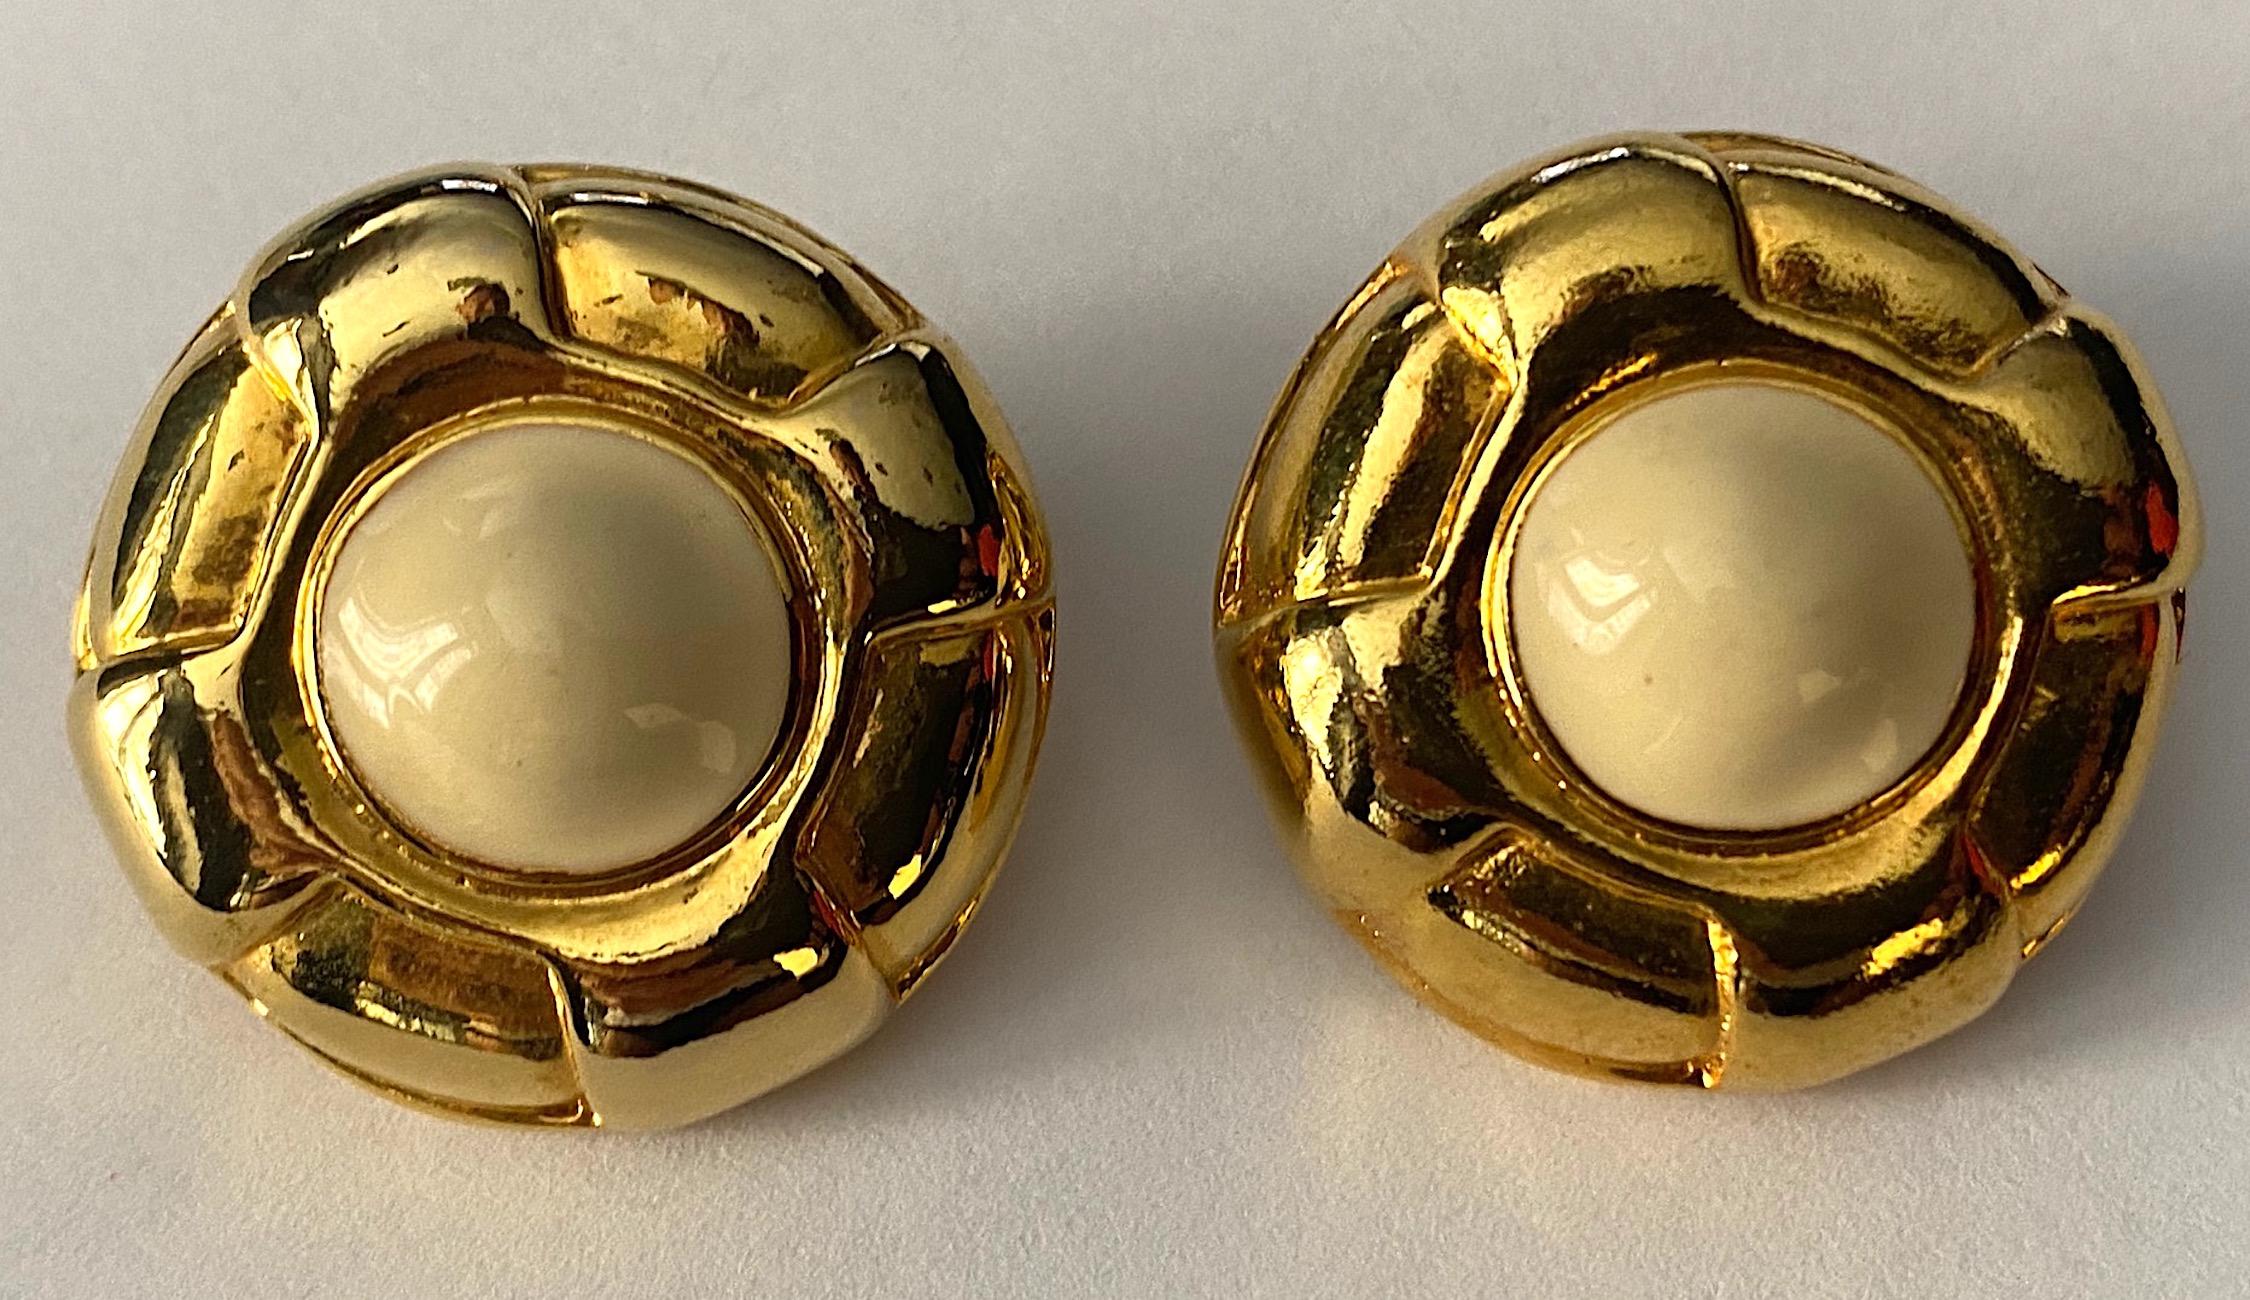 A very lovely pair of Escada button style clip earrings circa 1980. Each earring measures 1.19 inches in diameter and .38 of an inch deep, not including the clip back. The centers have a .5 inch diameter of ivory enamel. Each earring has an oval